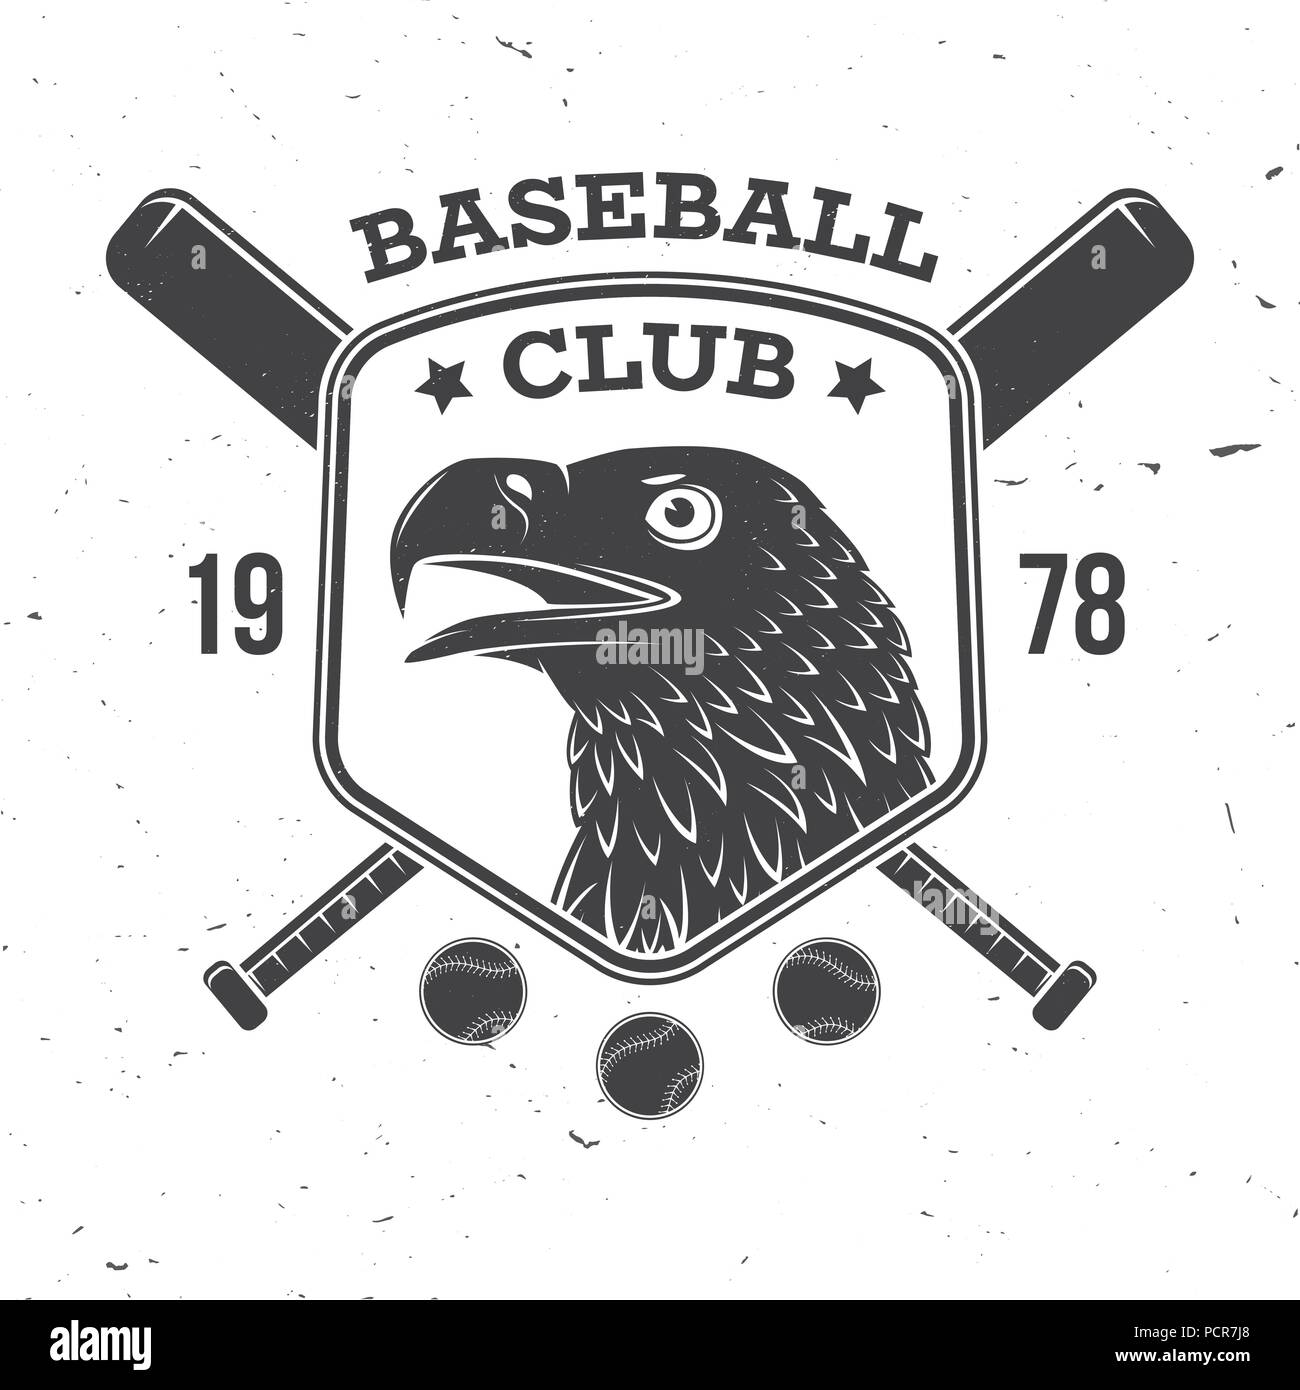 Baseball club badge. Vector illustration. Concept for shirt or logo, print, stamp or tee. Vintage typography design with baseball bats, eagle and ball for baseball silhouette. Stock Vector